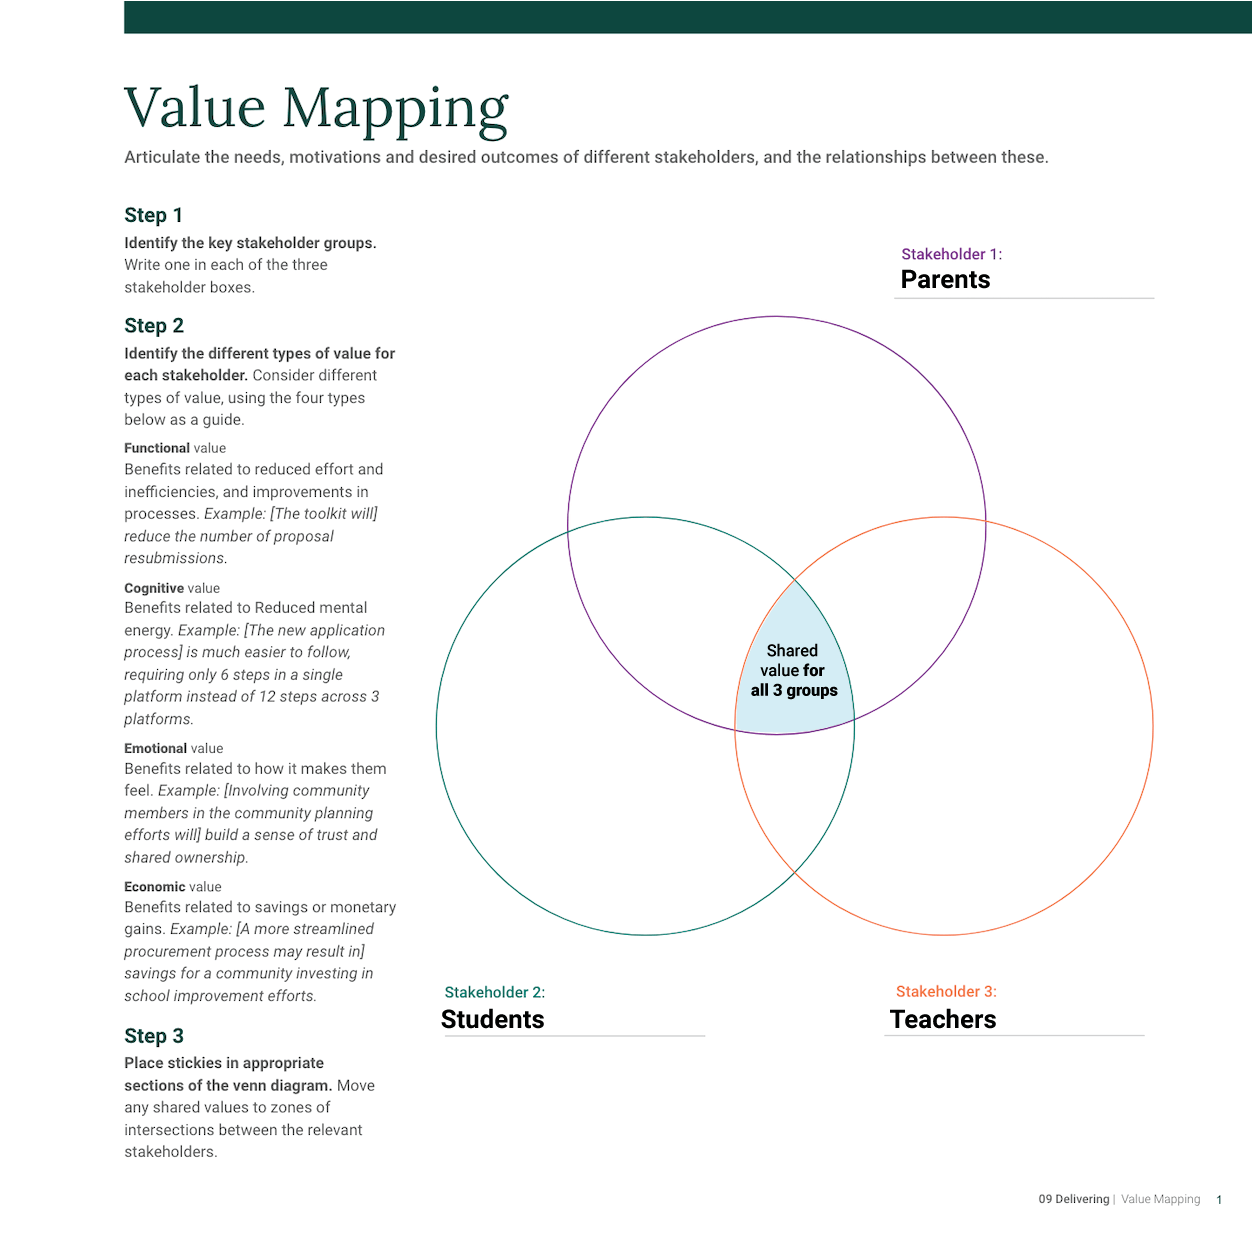 Value mapping venn diagram depicting a connection between the group